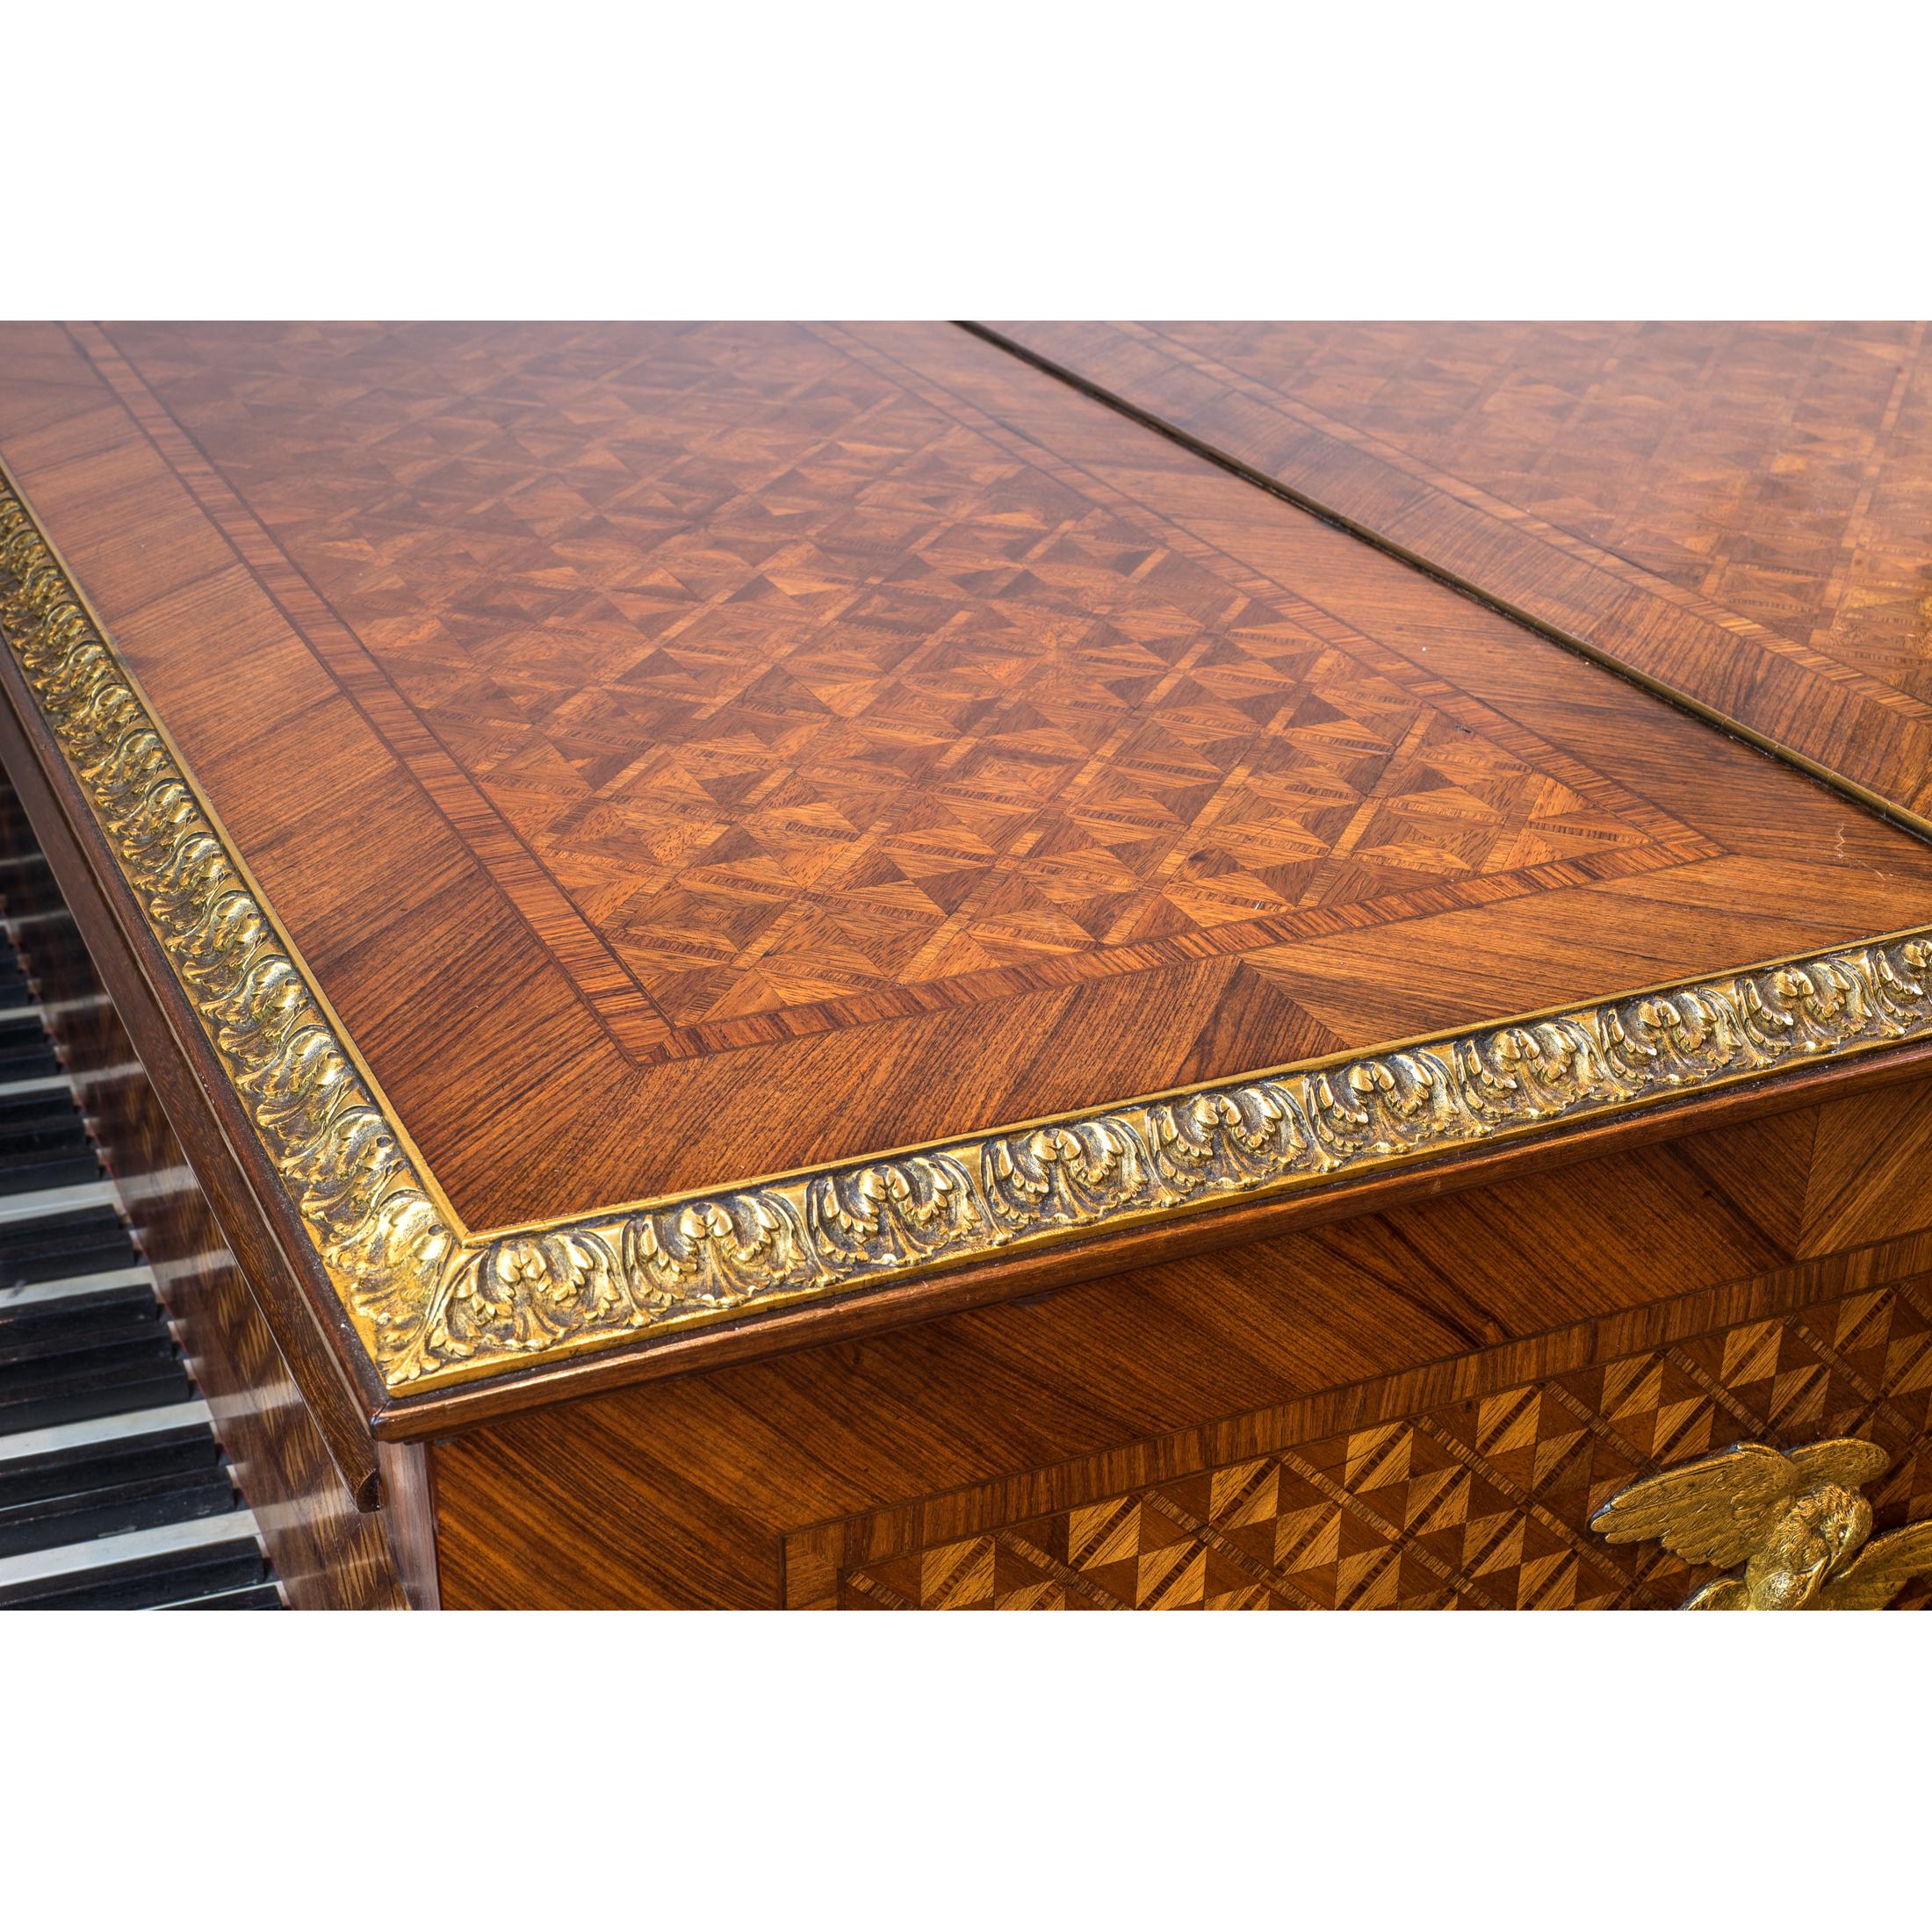 Important Ormolu-Mounted Amaranth, Kingwood and Satine Parquetry Grand Piano For Sale 2